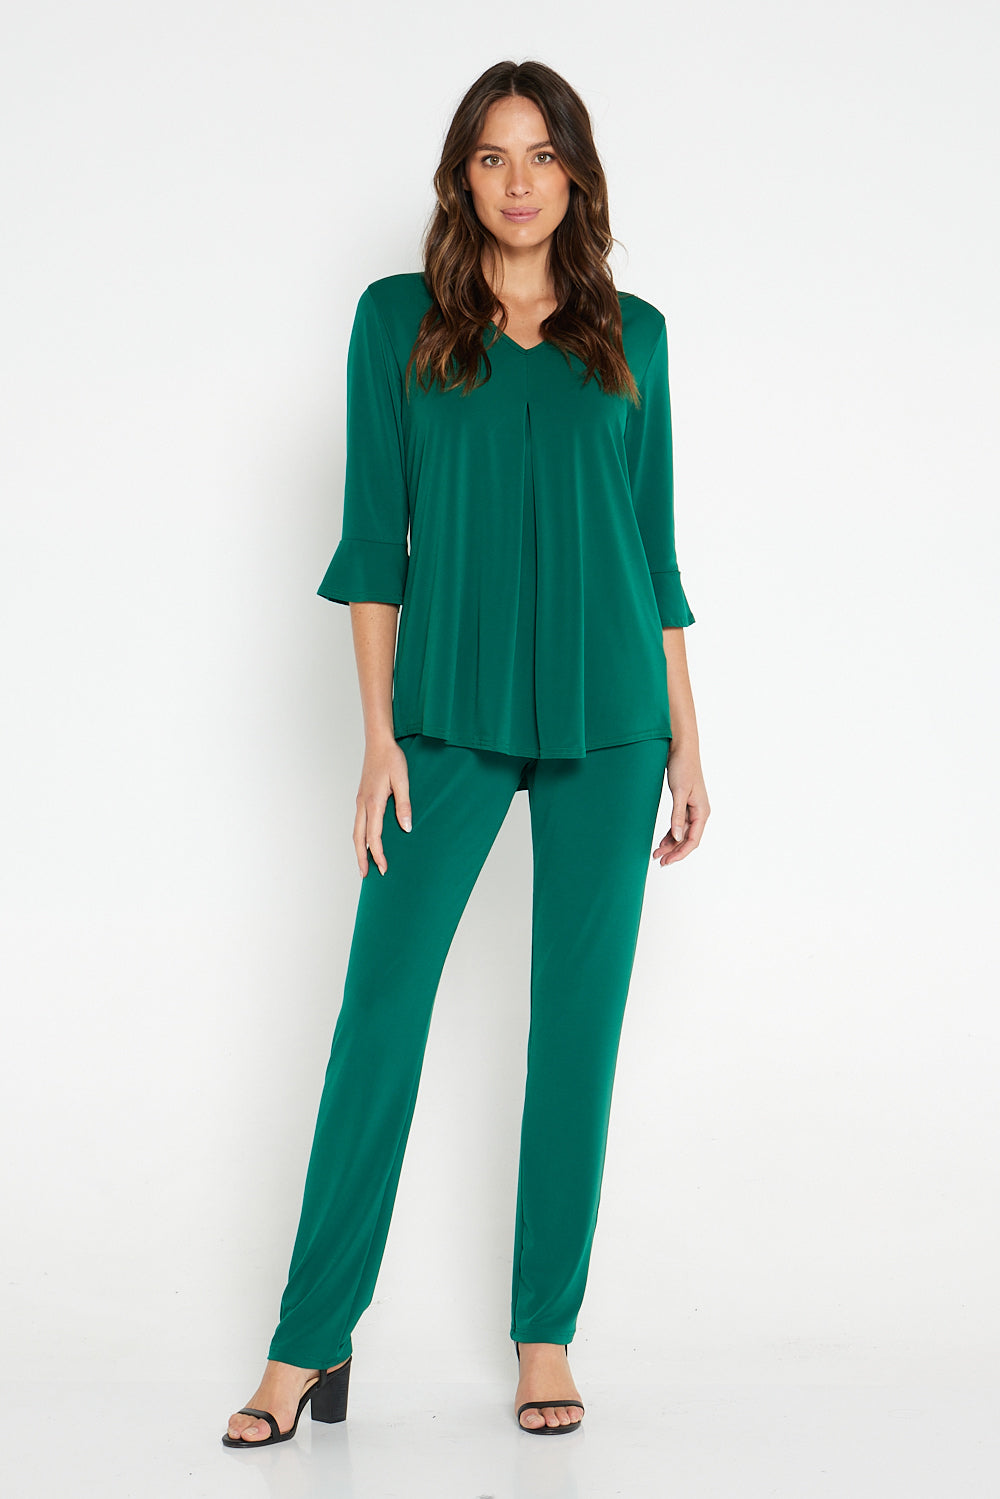 Gianna Pants Tall - Forest